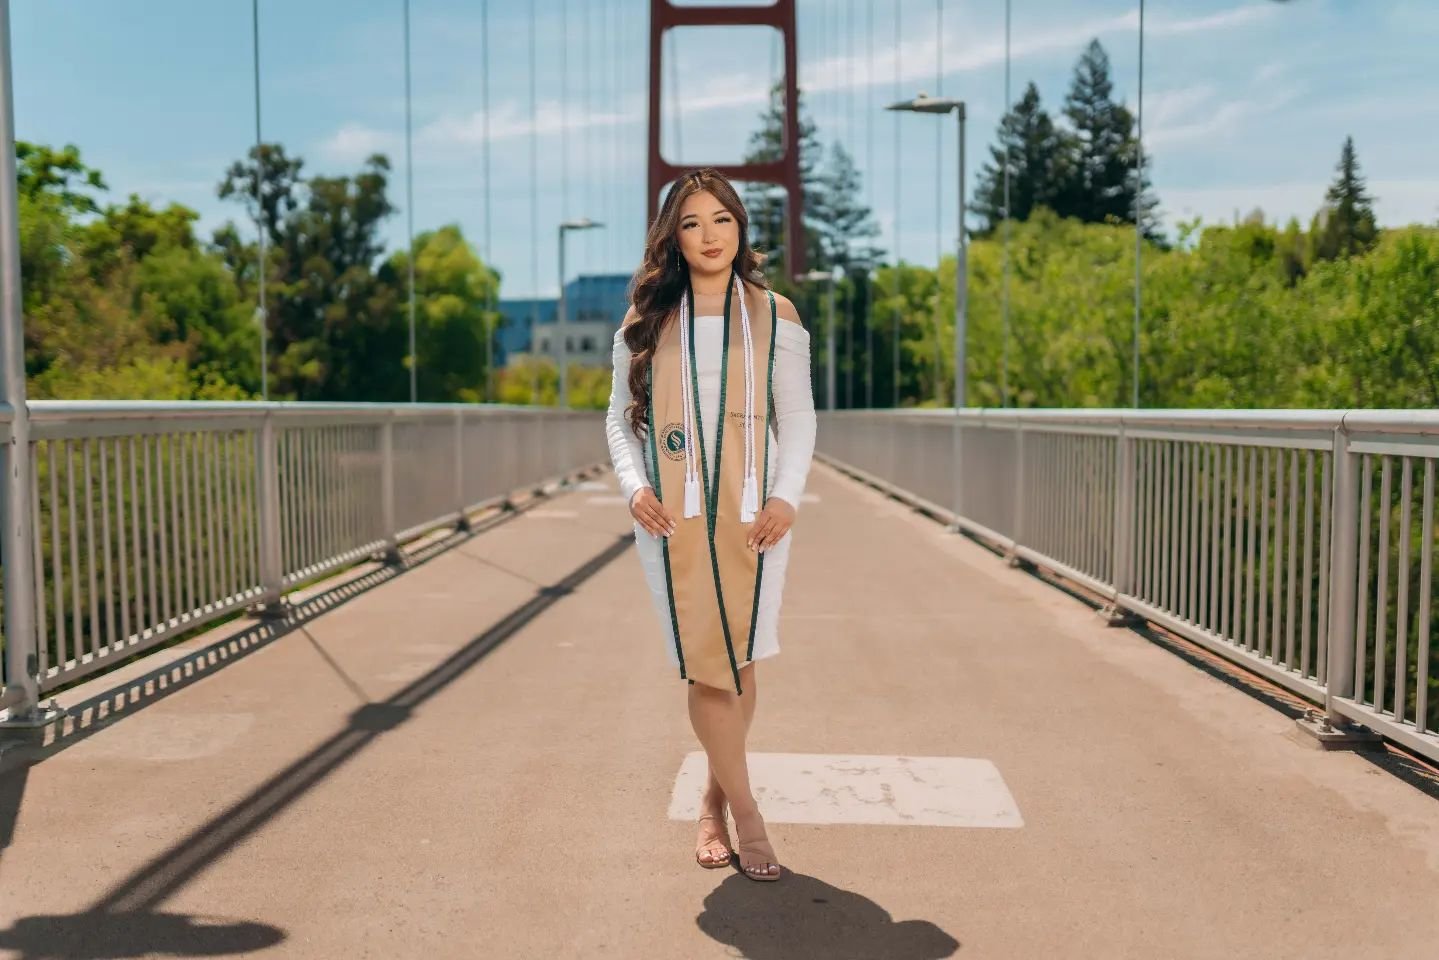 Graduation is right around the corner! Can't wait to see all my graduates walk, before that happens, get your pics taken!!! 📸🎓
#graduationphotoshoot #sacstate #ucdavis #sacstatephotographer
.
.
.
.
.
.
.
.
.
#sigma #sigma85mmf14 #sigma85mmart
#tren